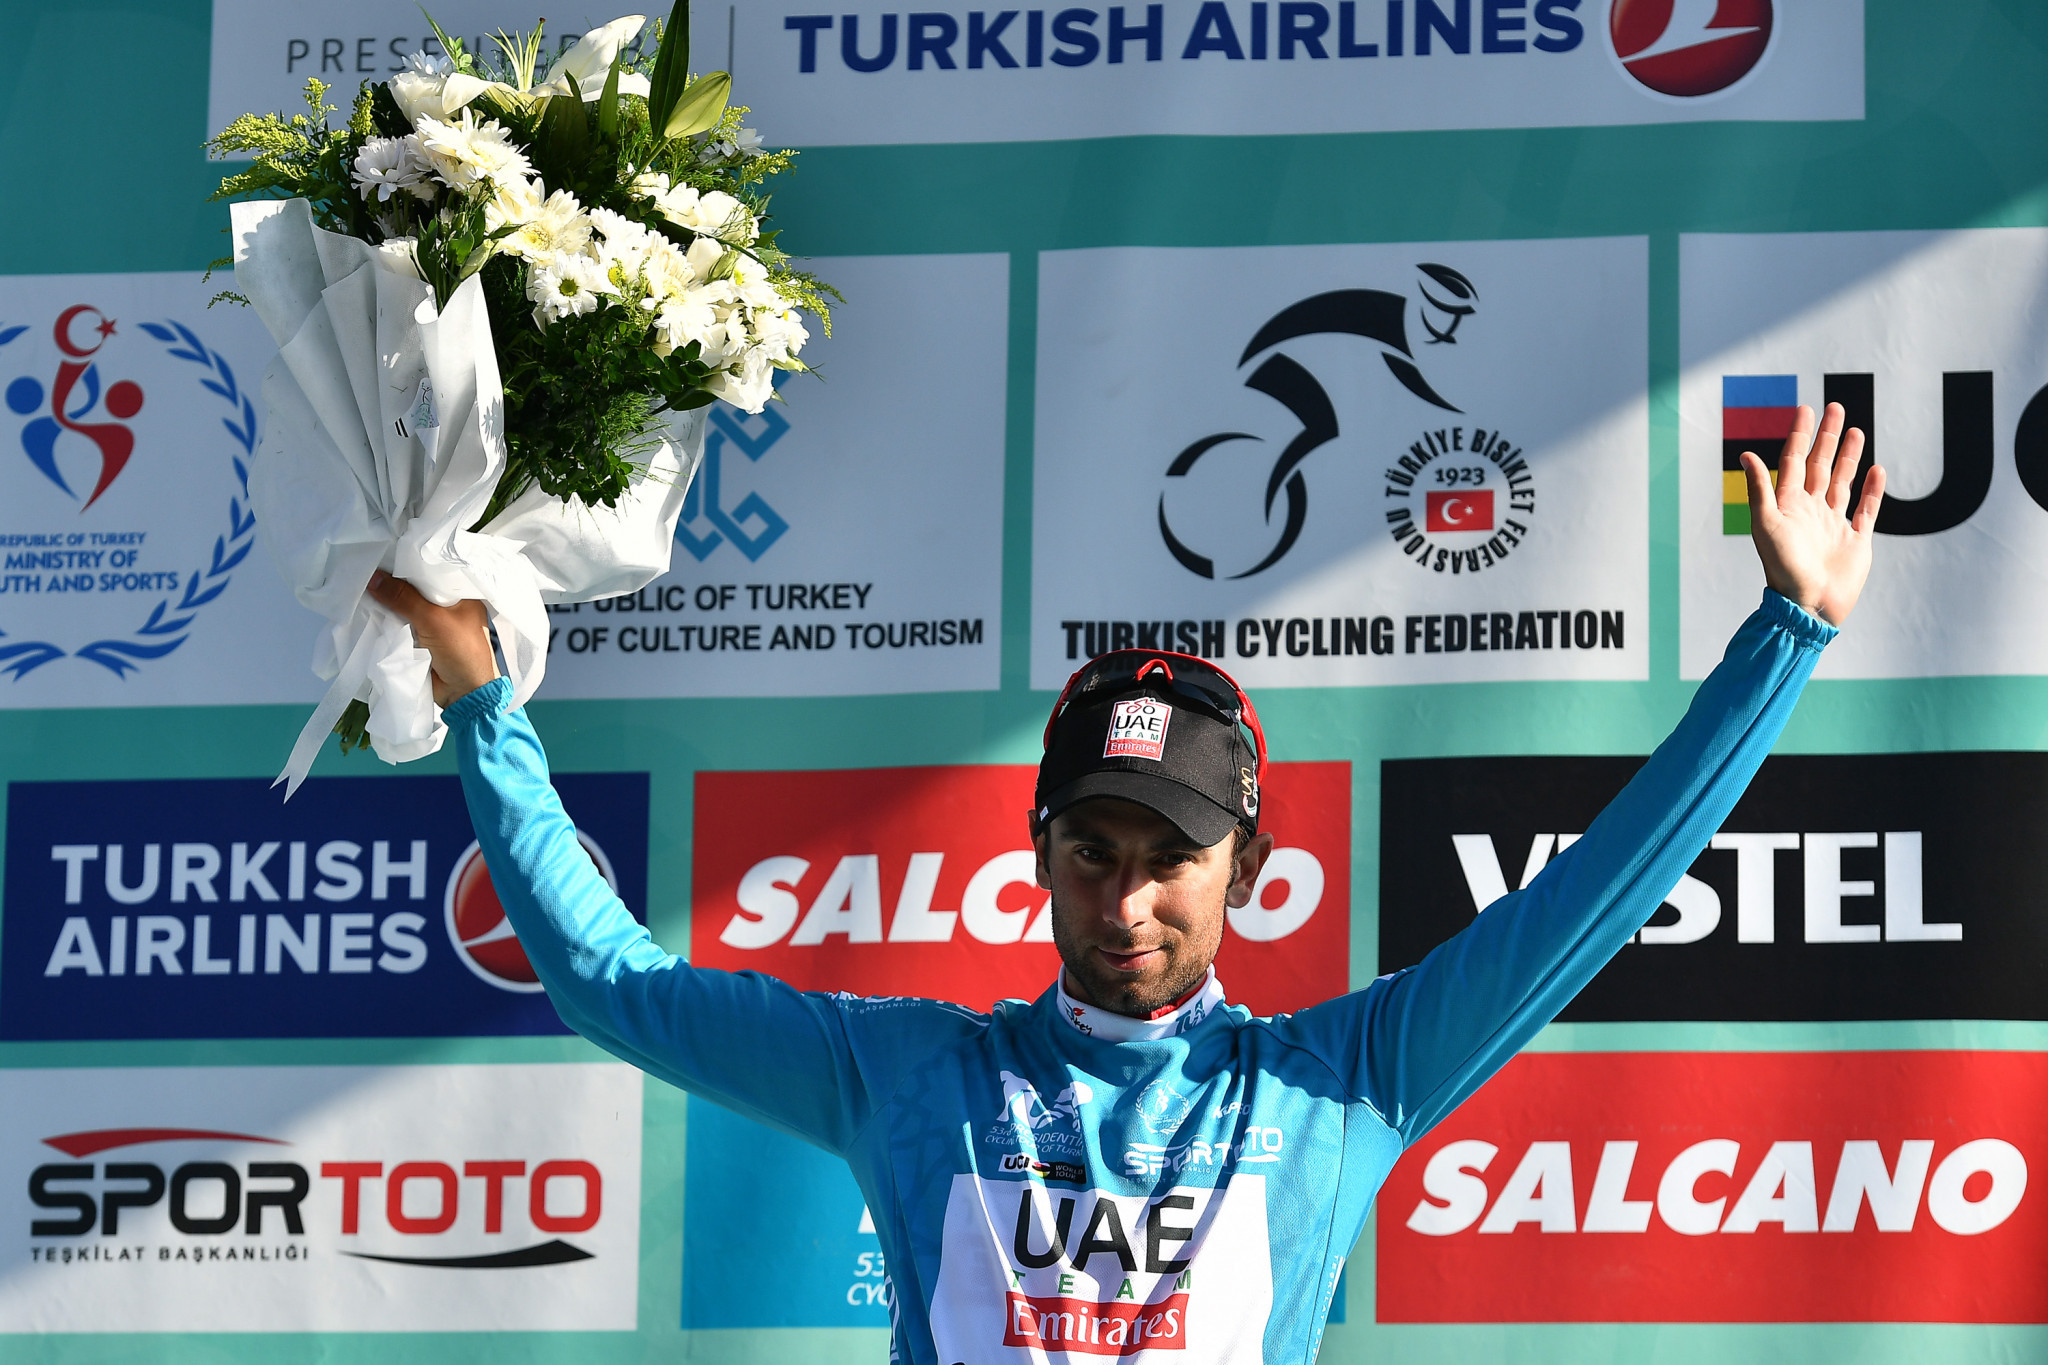 Ulissi claims Tour of Turkey title